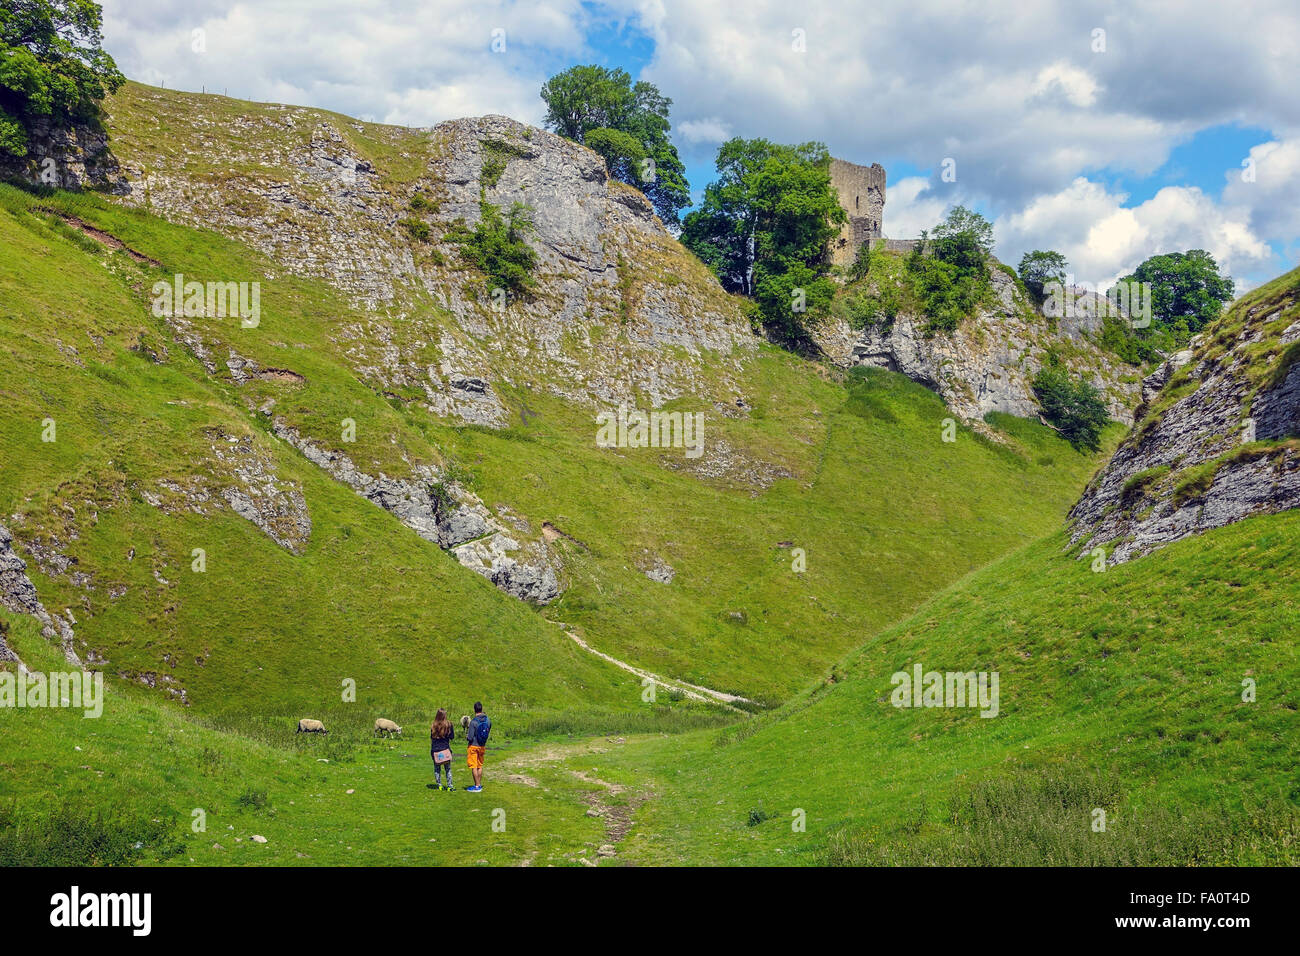 Two walkers hikers in Cavedale with Pevril Castle, Castleton Stock Photo